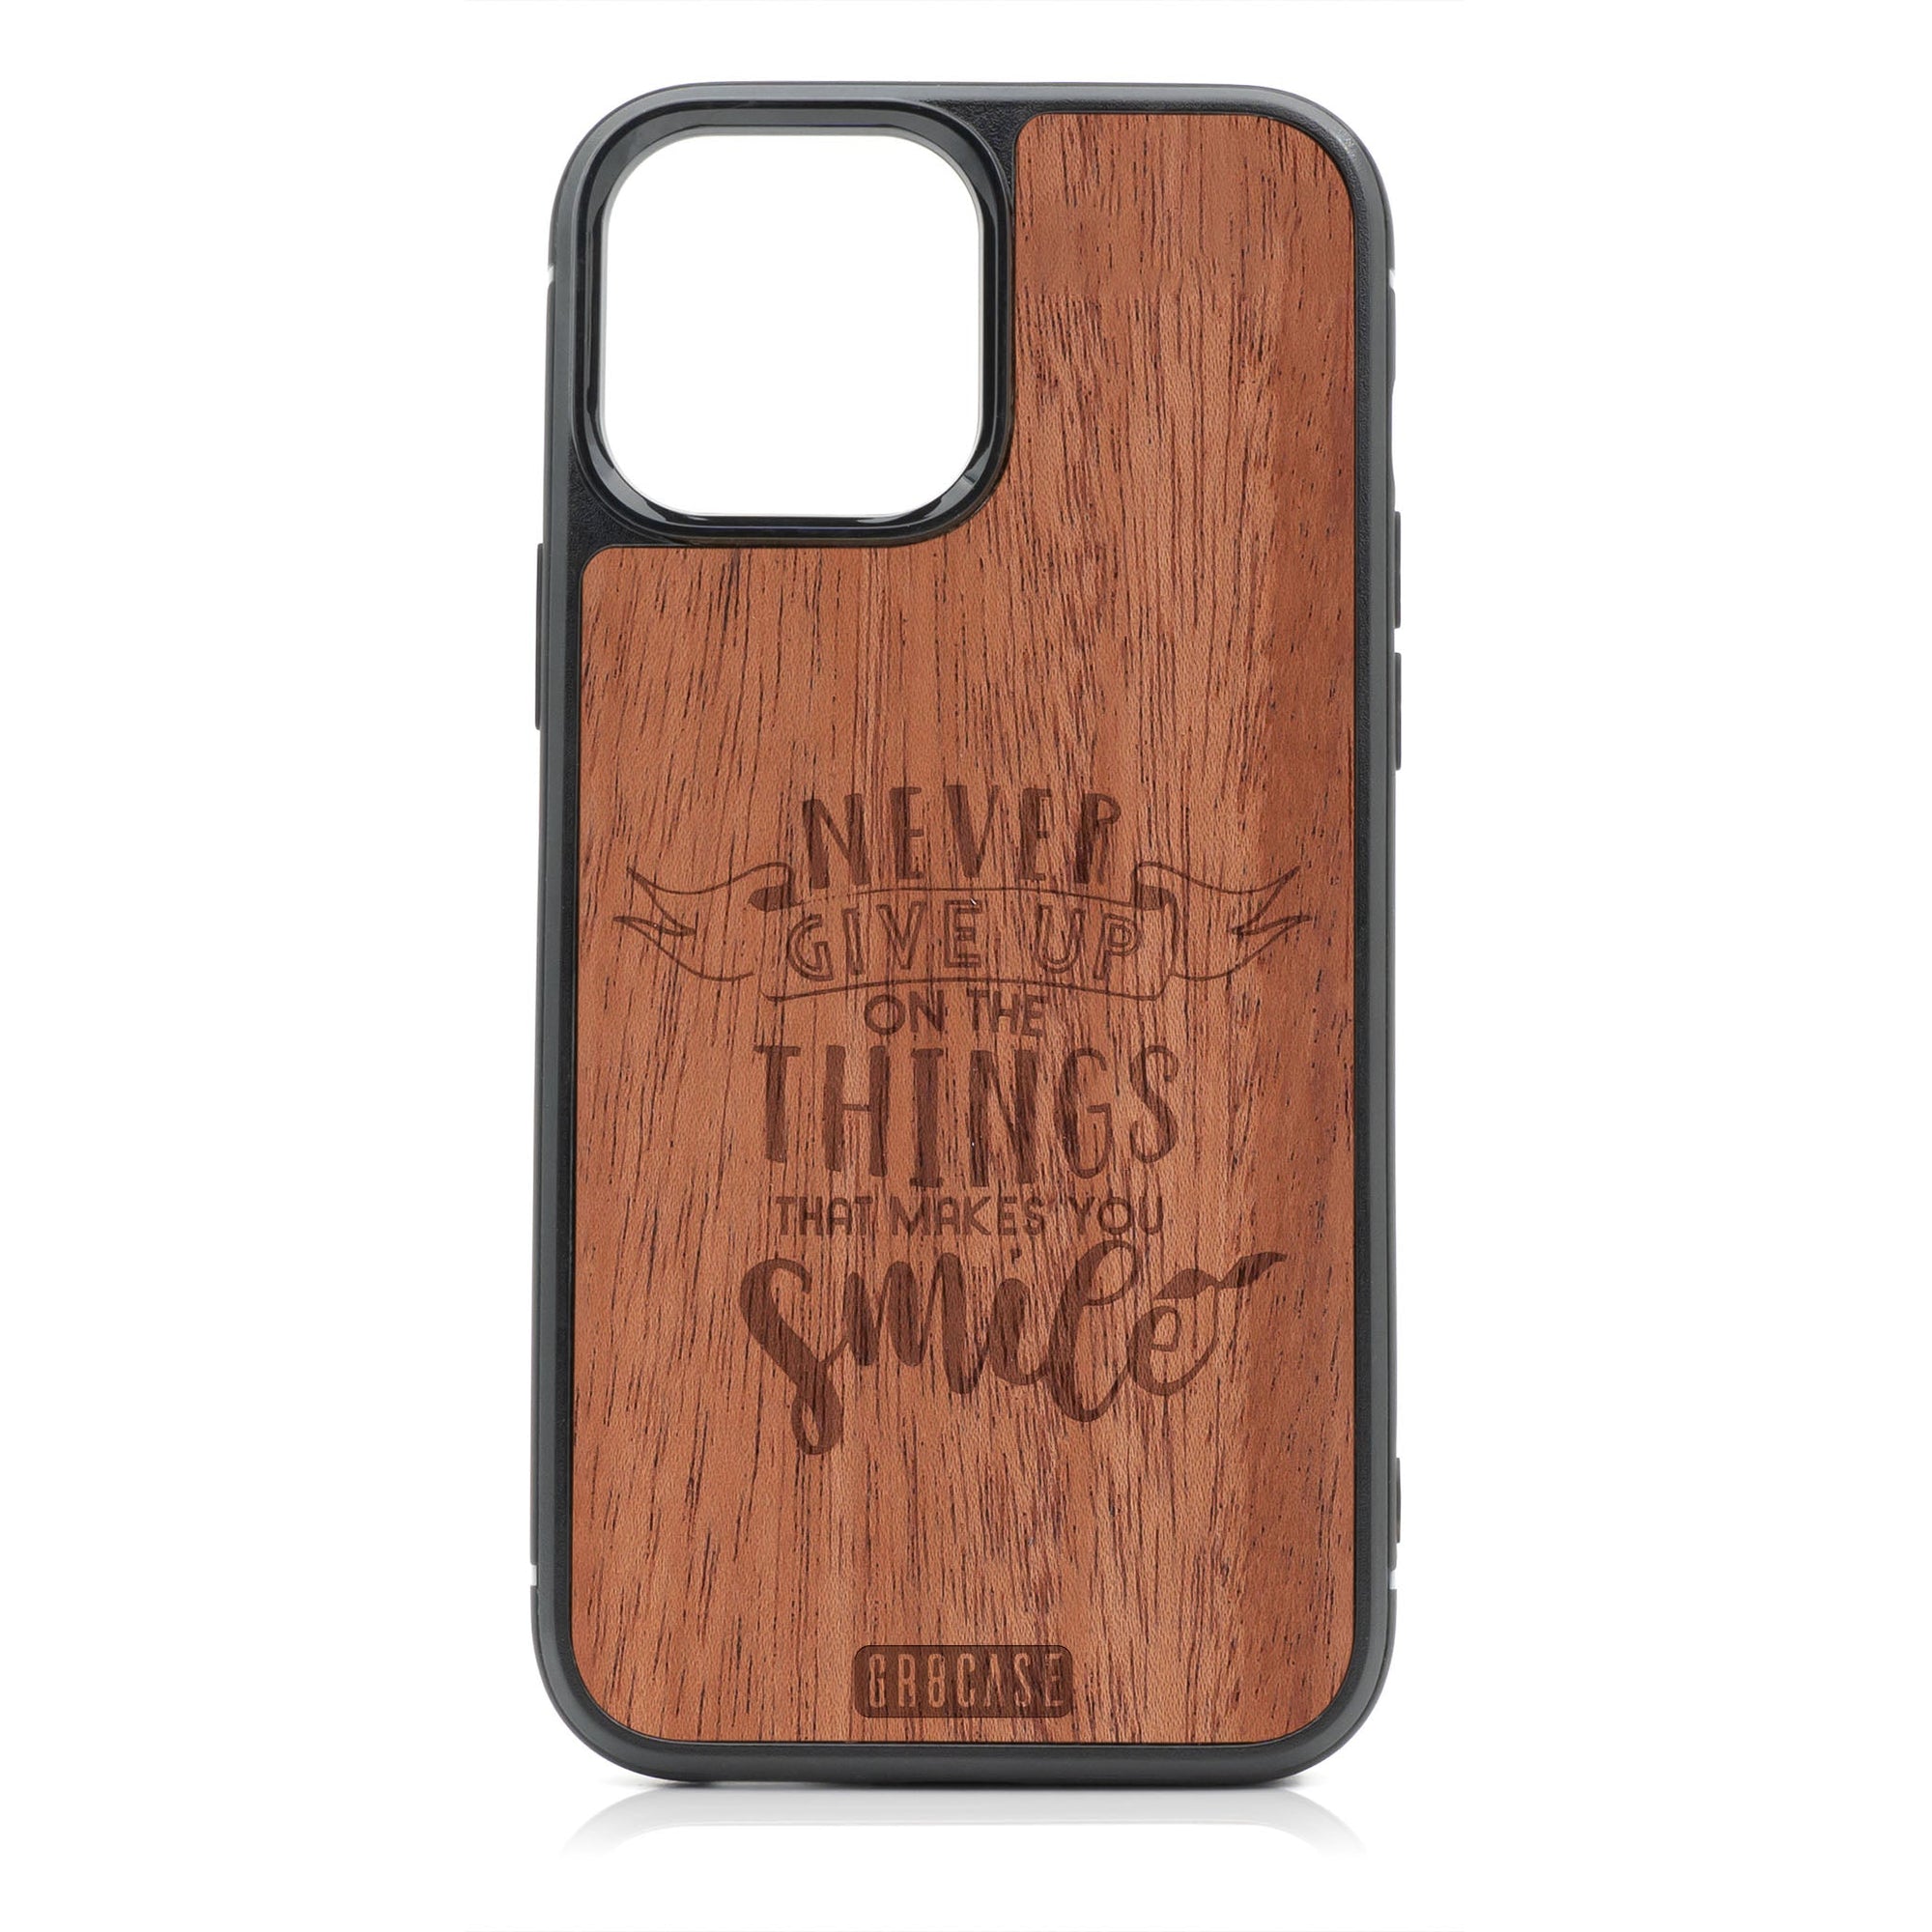 Never Give Up On The Things That Make You Smile Design Wood Case For iPhone 14 Pro Max